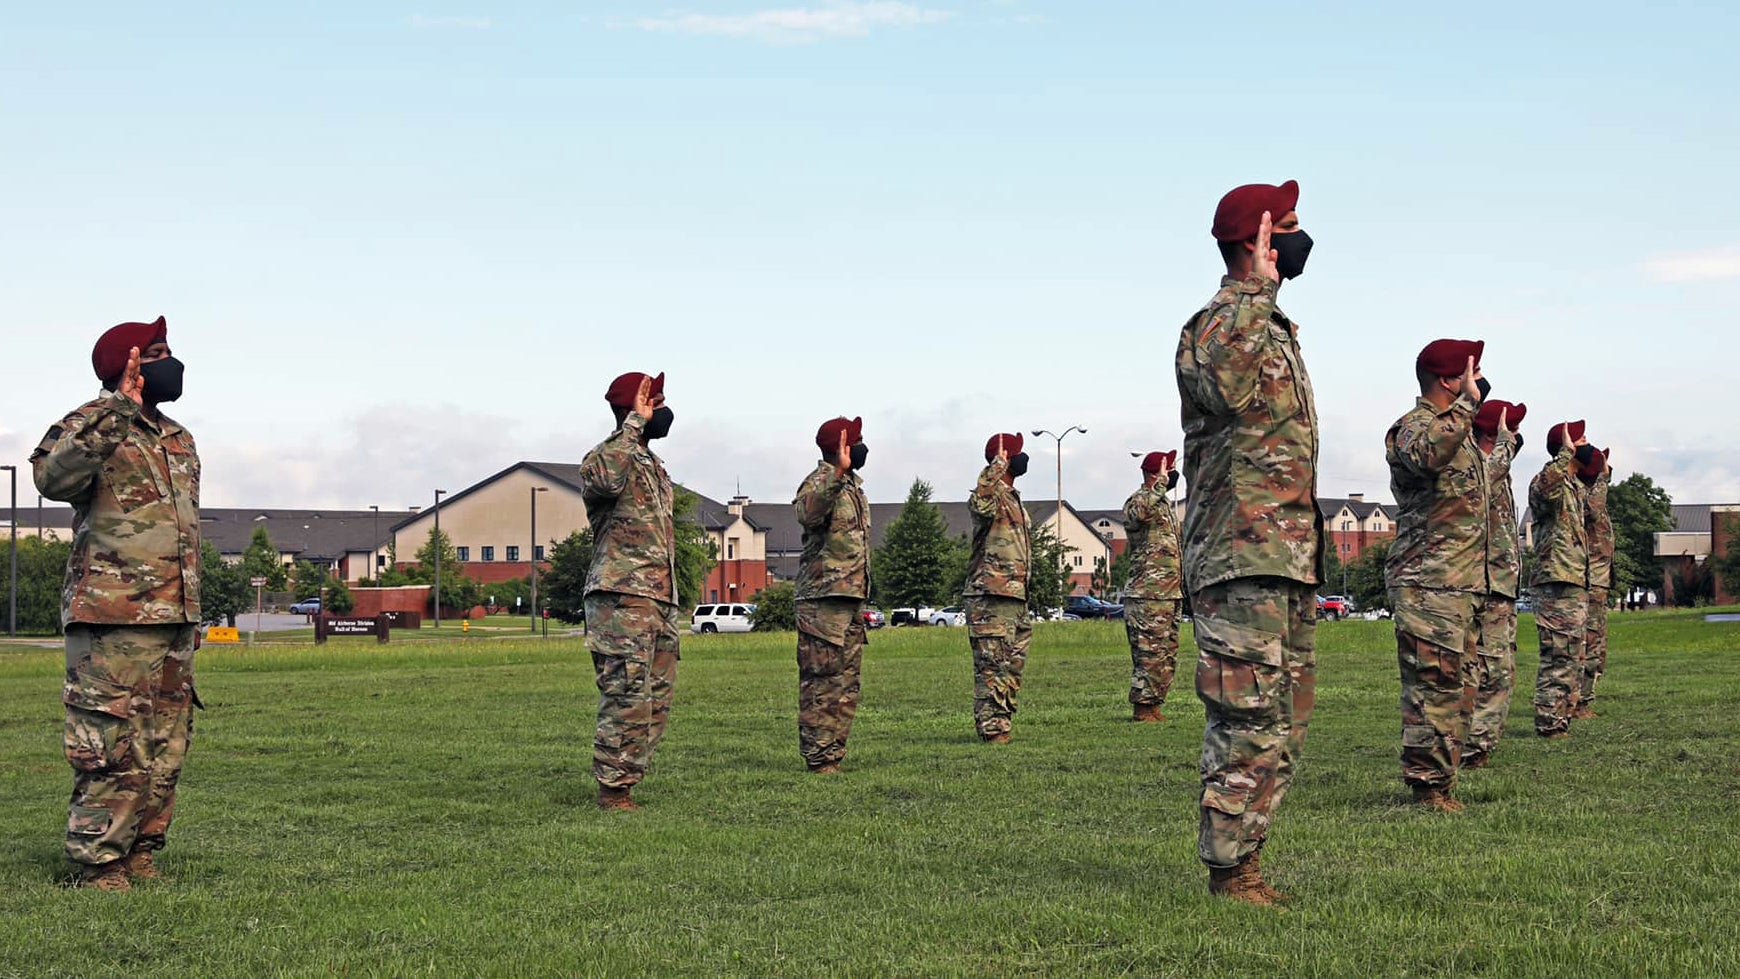 Soldiers at attention